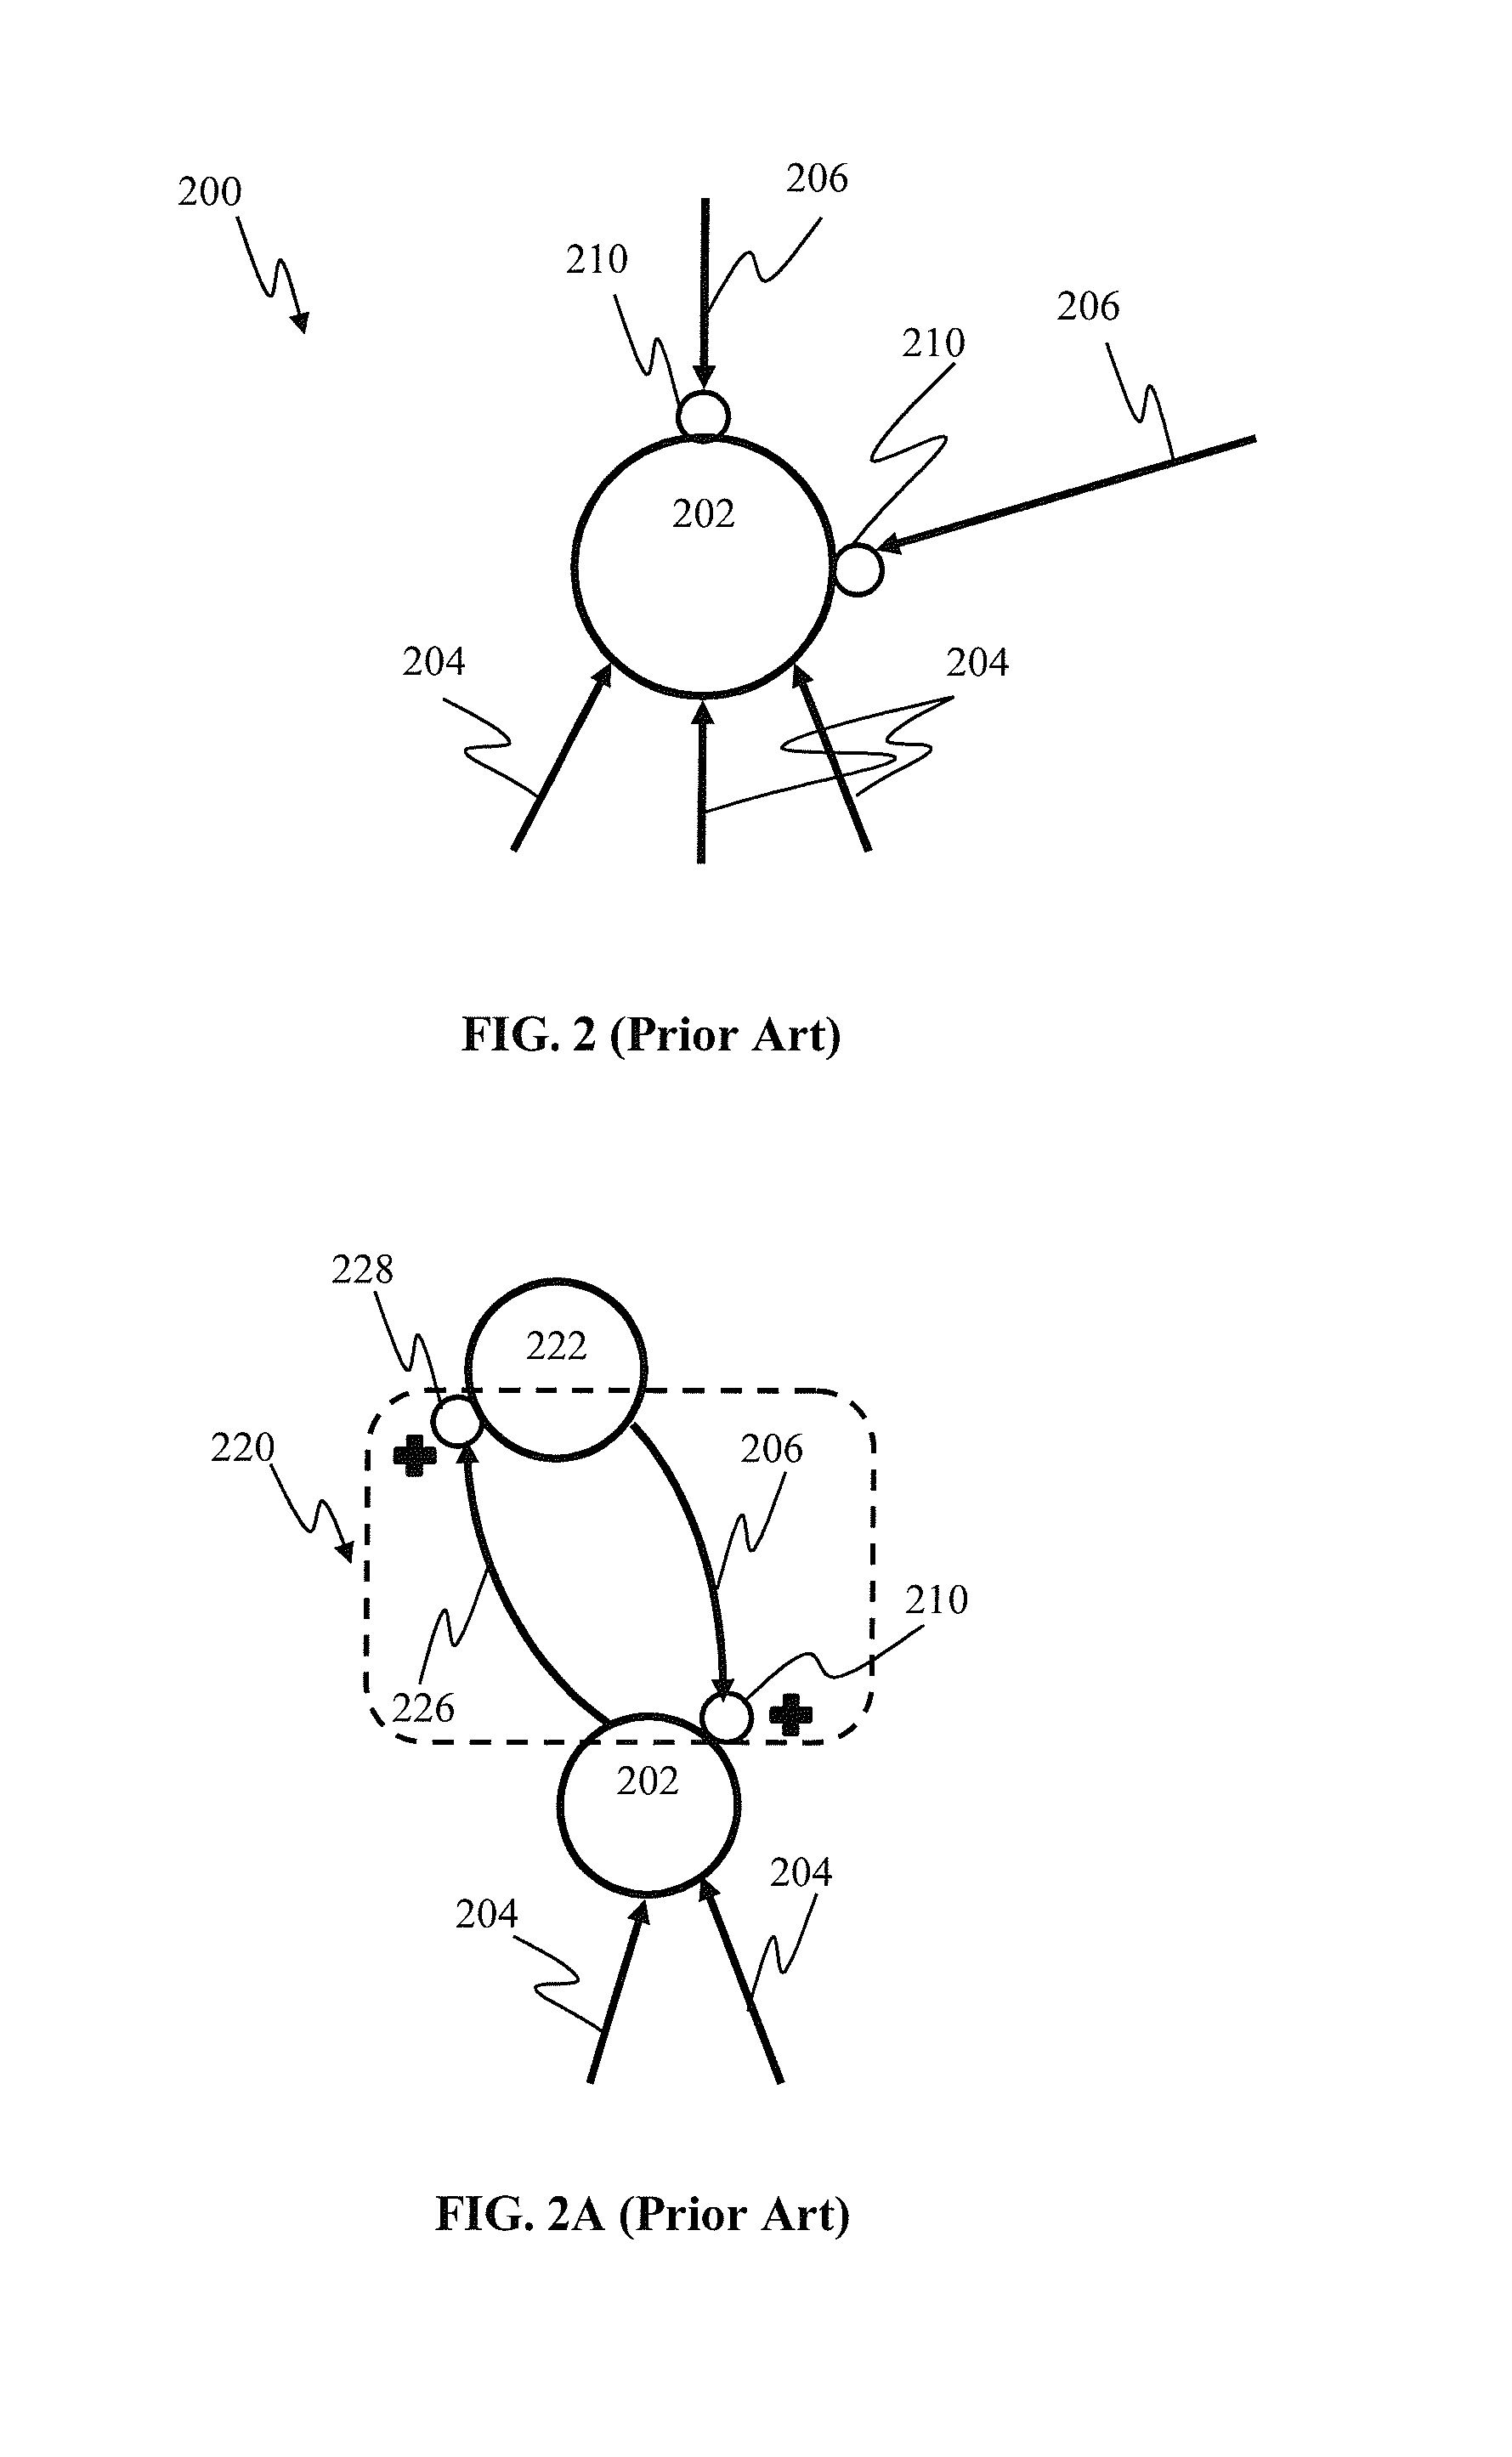 Spiking neural network feedback apparatus and methods